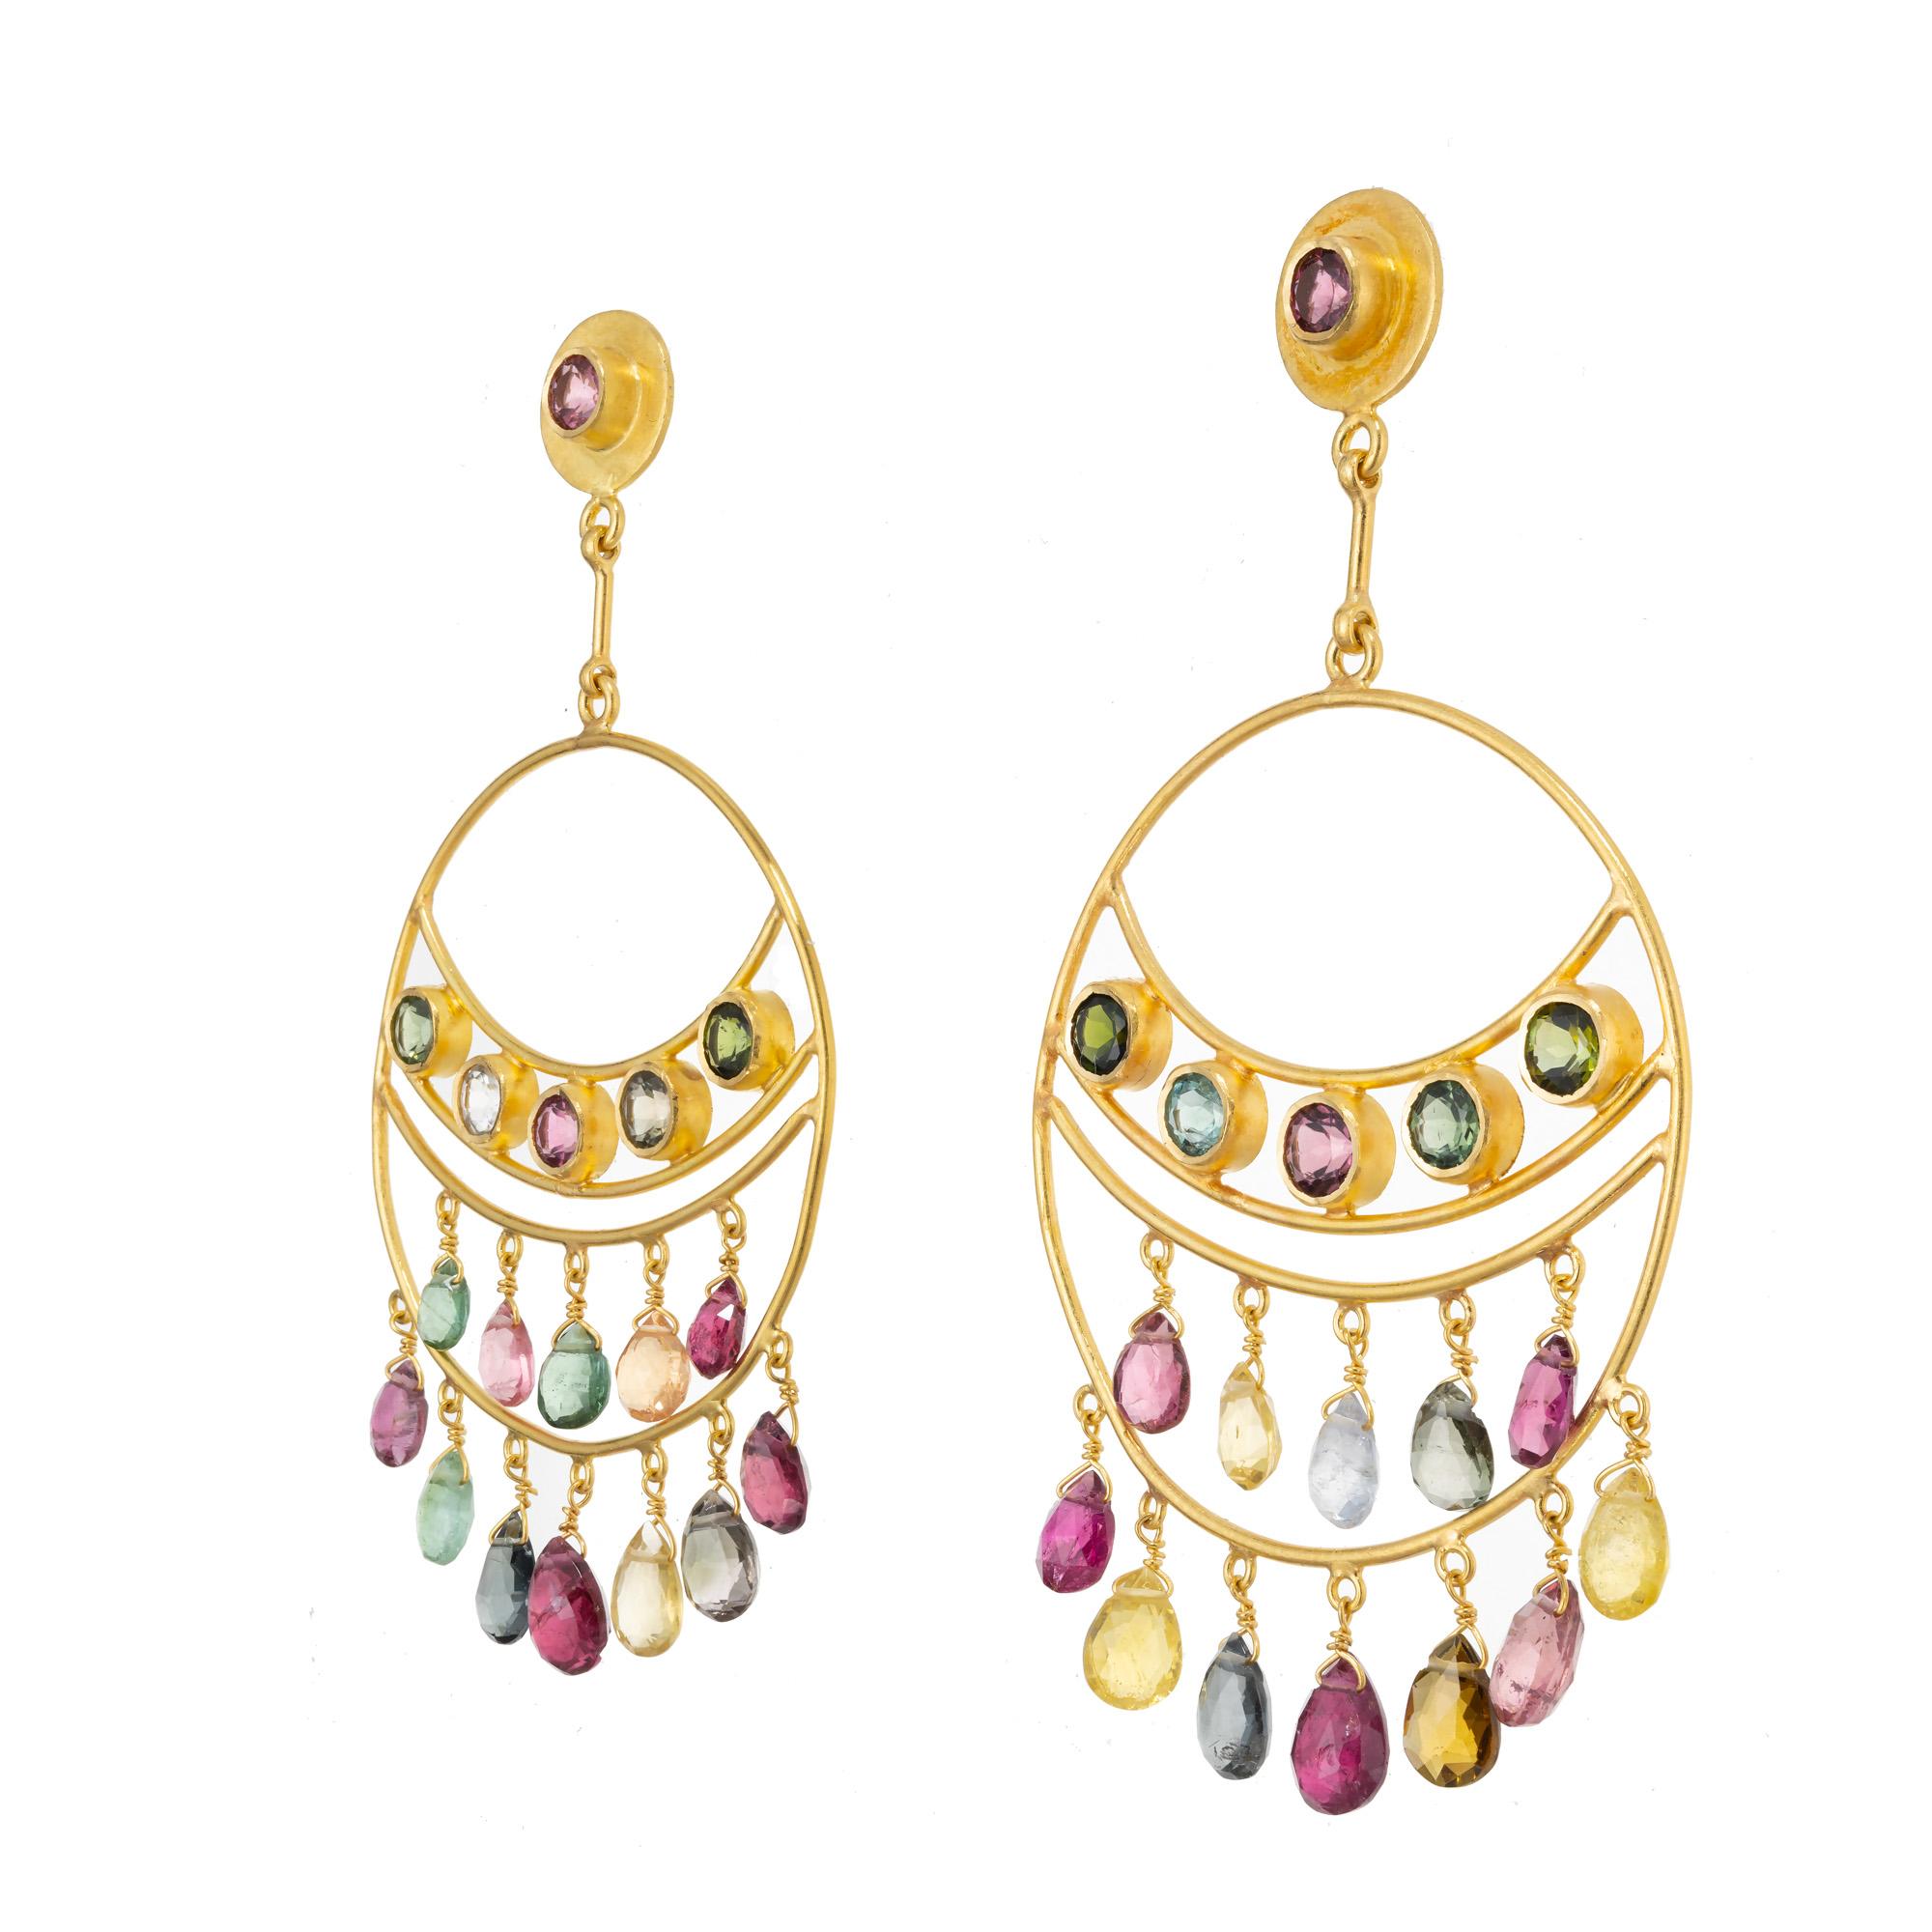 1970's Beautiful multi color Tourmaline dangle chandelier earrings. 12 round pink/purple, green and clear tourmalines, weighing approximately 3.00cts. set in 18k yellow gold Handmade settings, accented with 24 pear shaped multi color briolette's